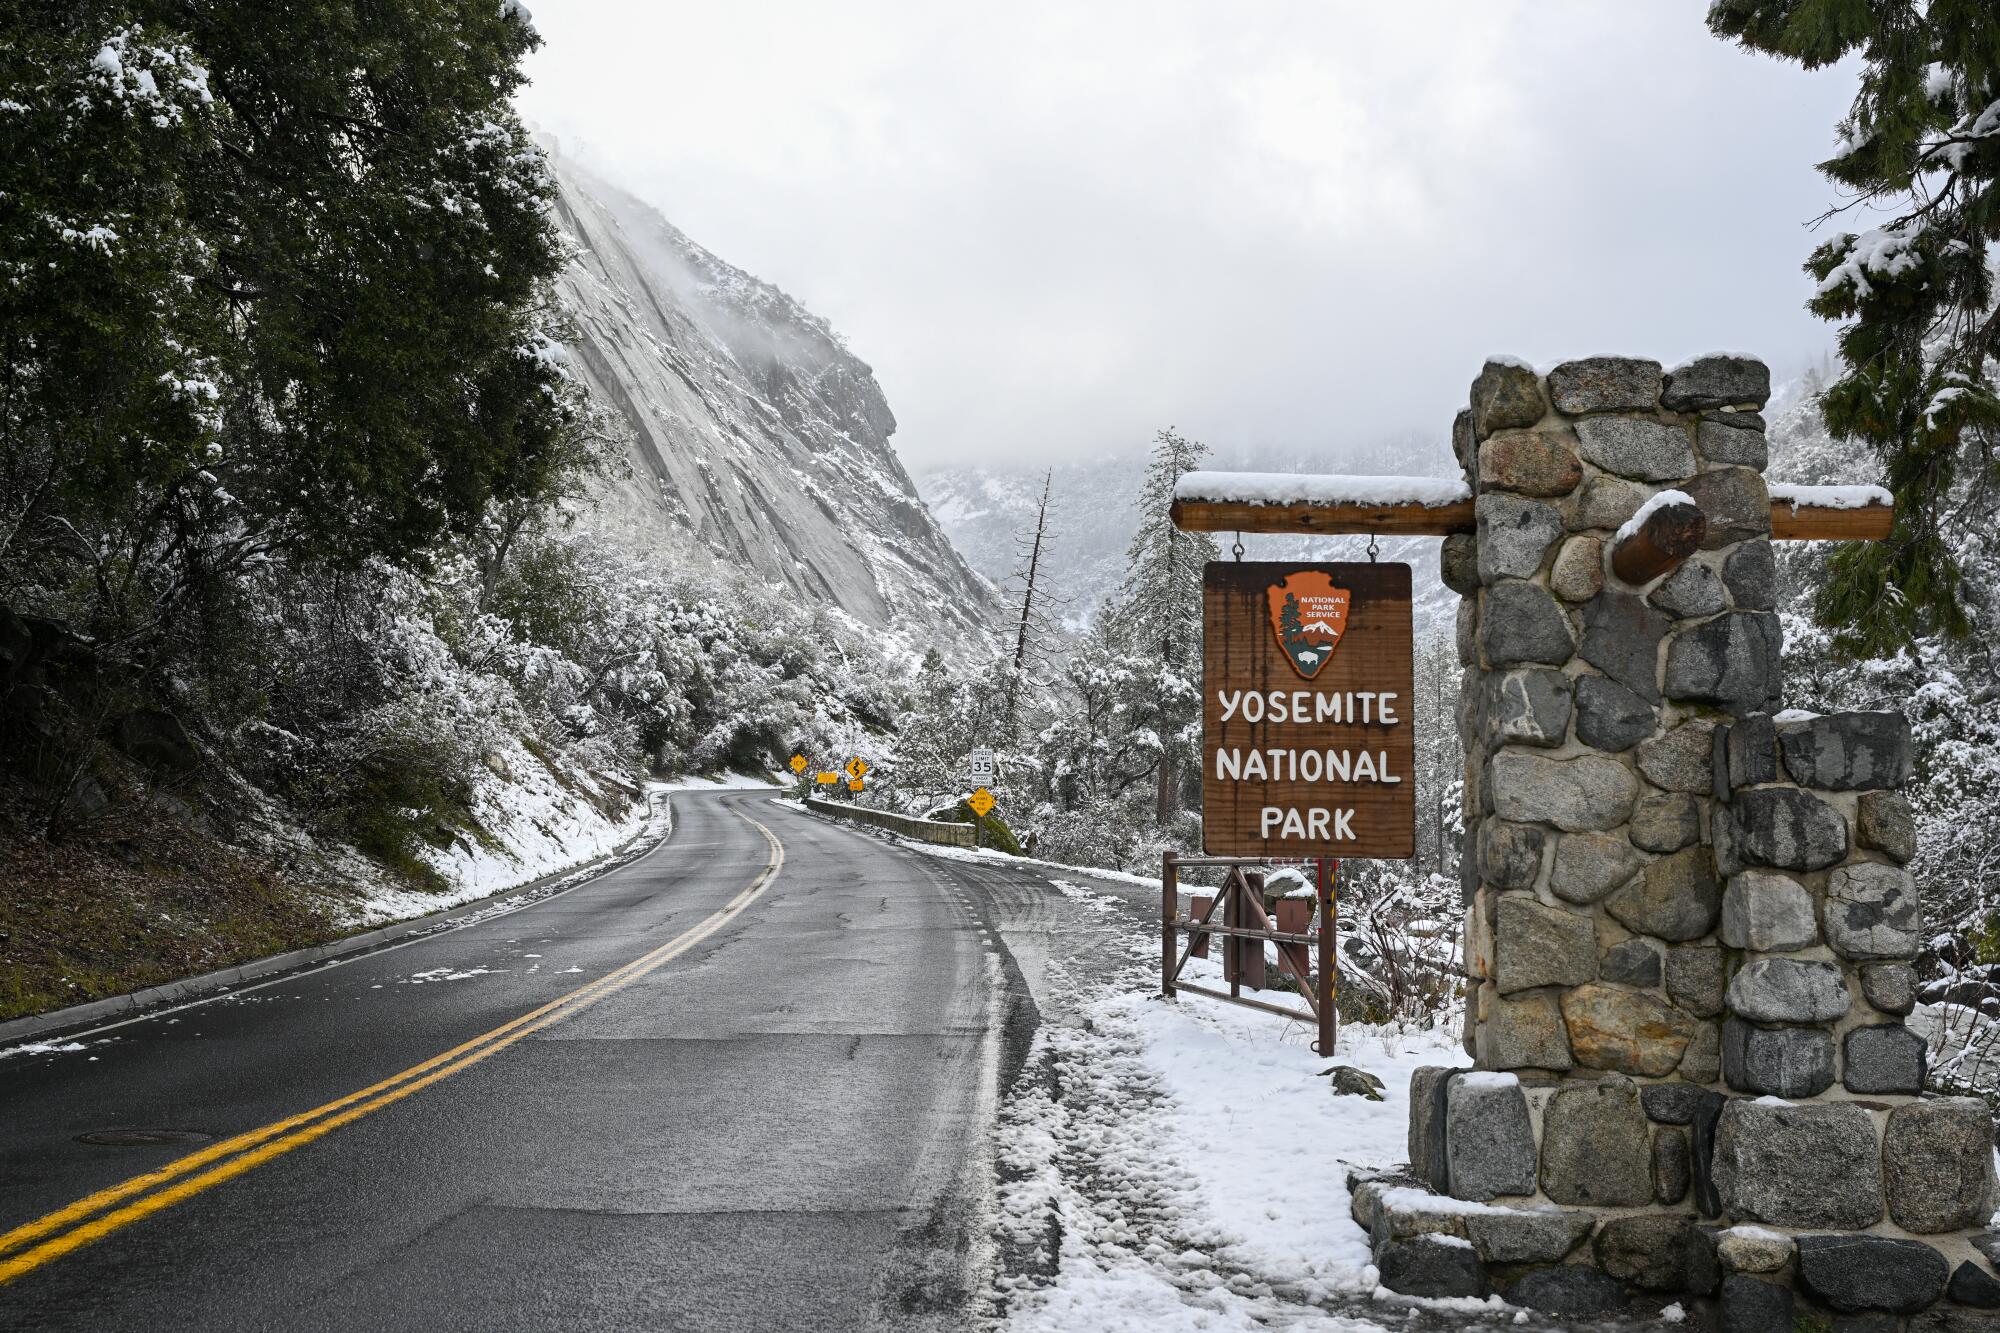 A welcome sign is seen as snow blankets Yosemite National Park, which remains closed until March 1.